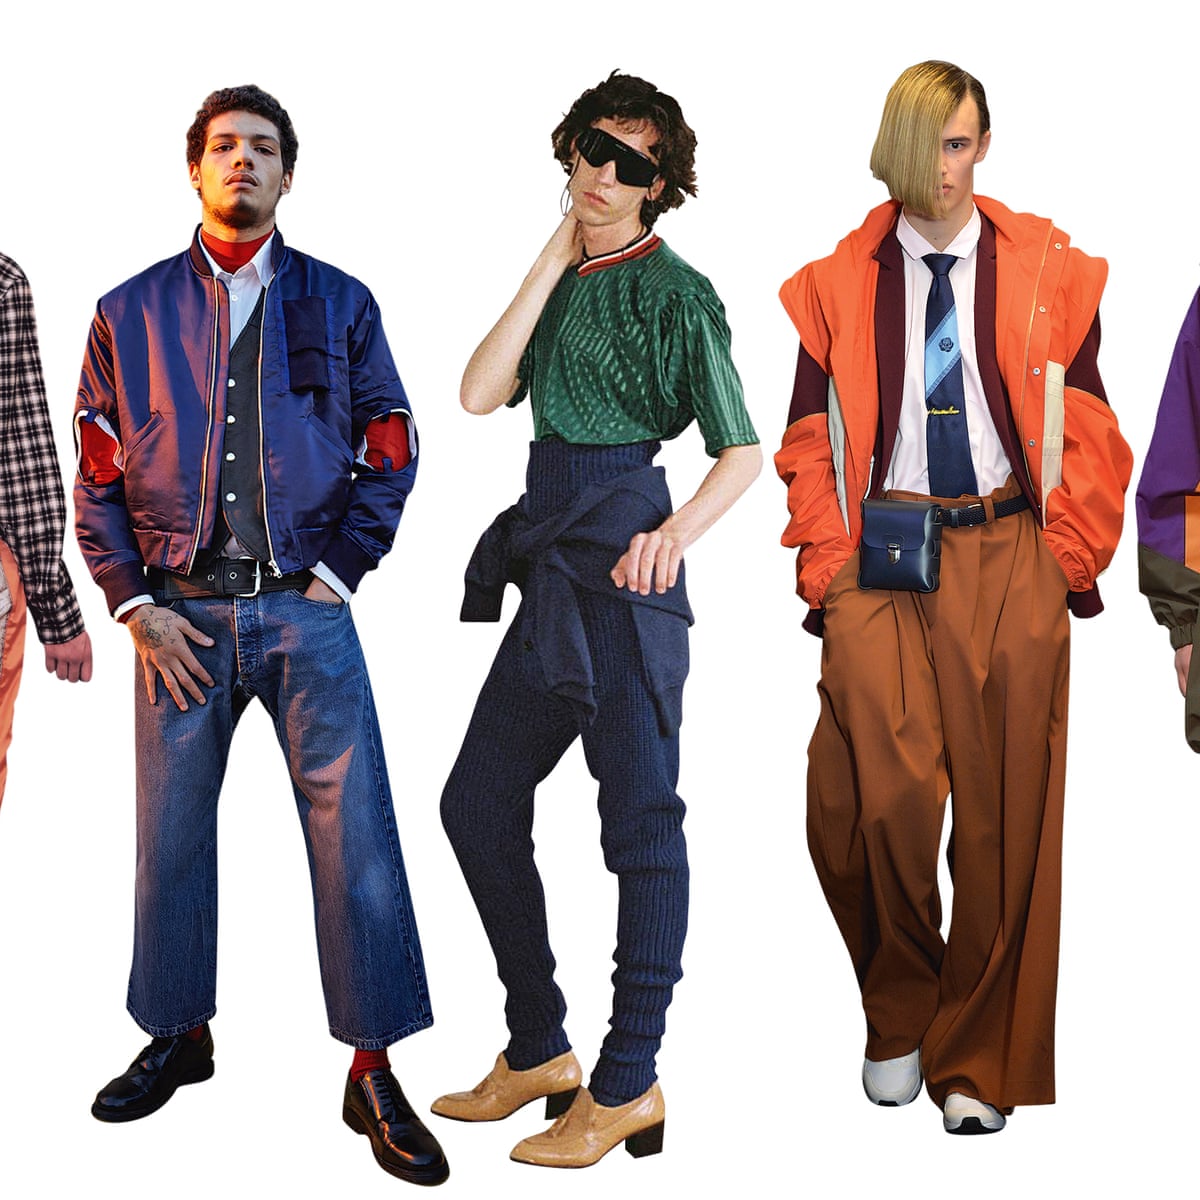 Menswear designer Martine Rose: 'Fashion used to be for outsiders